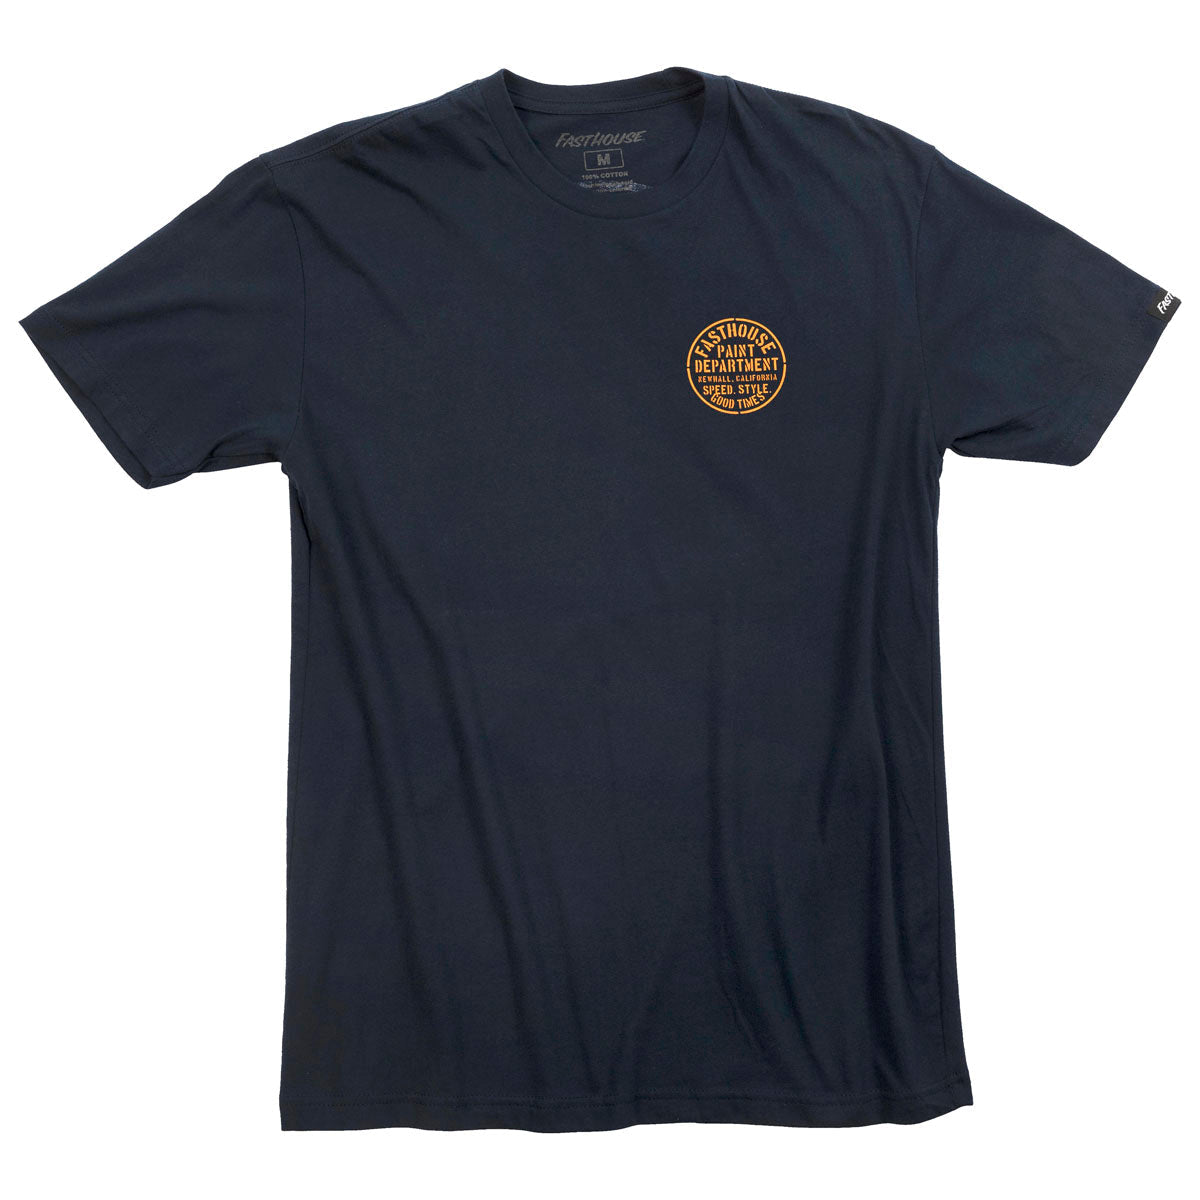 Fasthouse Paint Dept Tee - Navy